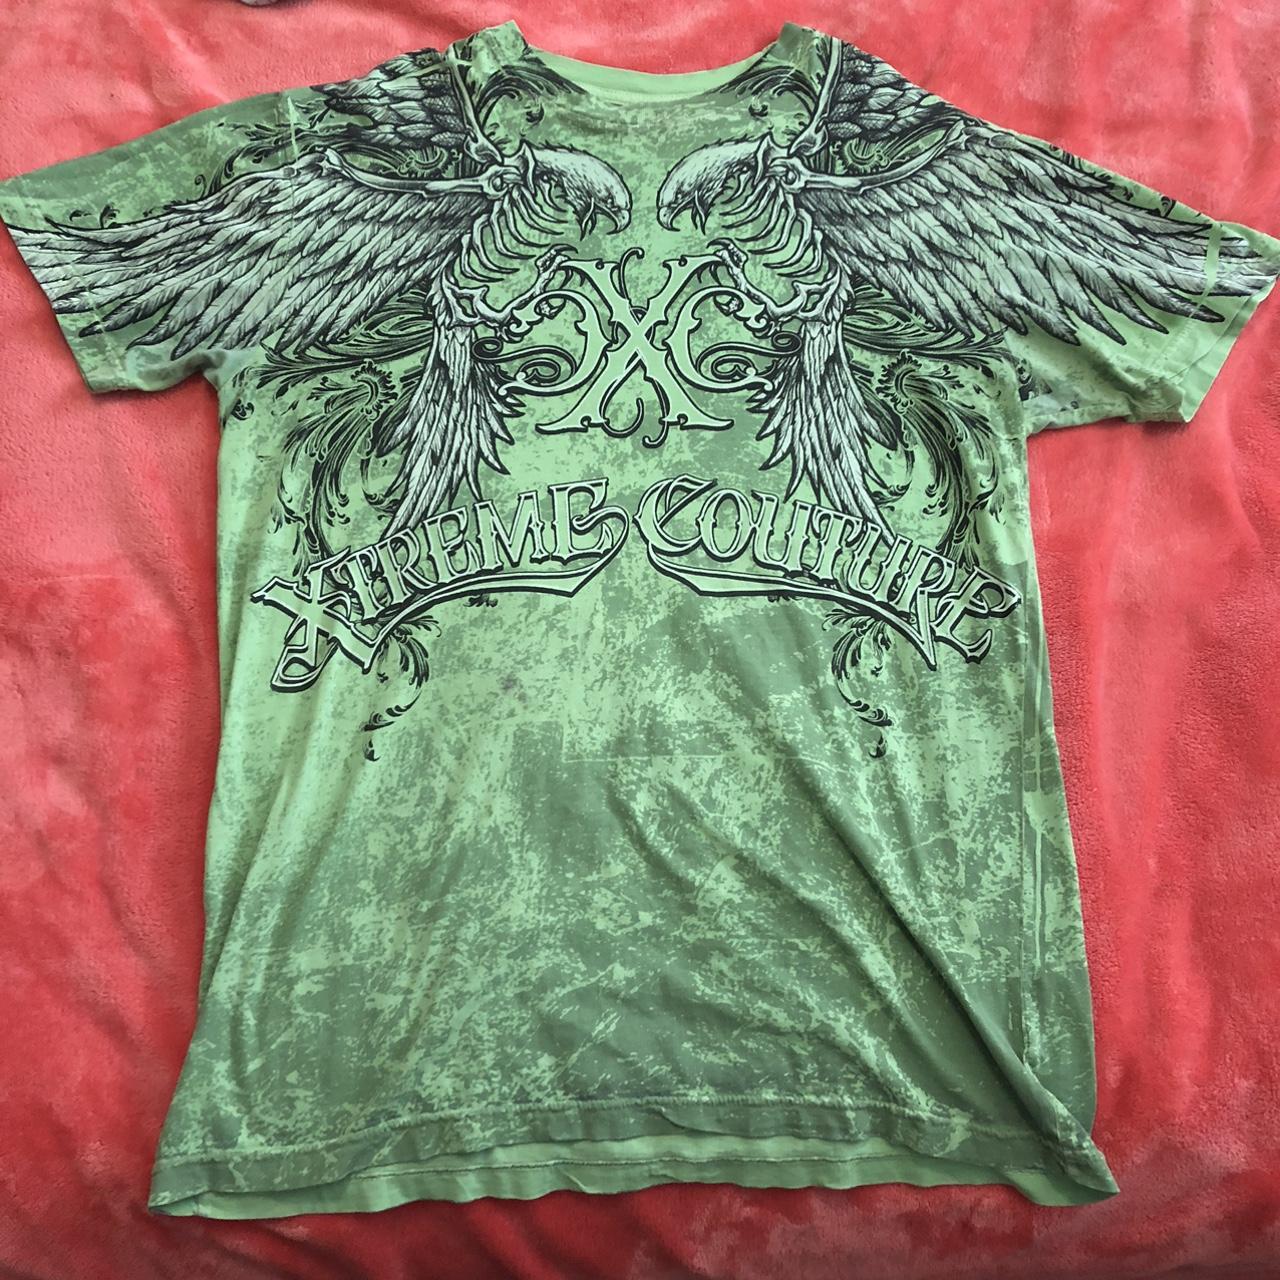 super rare xtreme couture wing print t shirt, this... - Depop